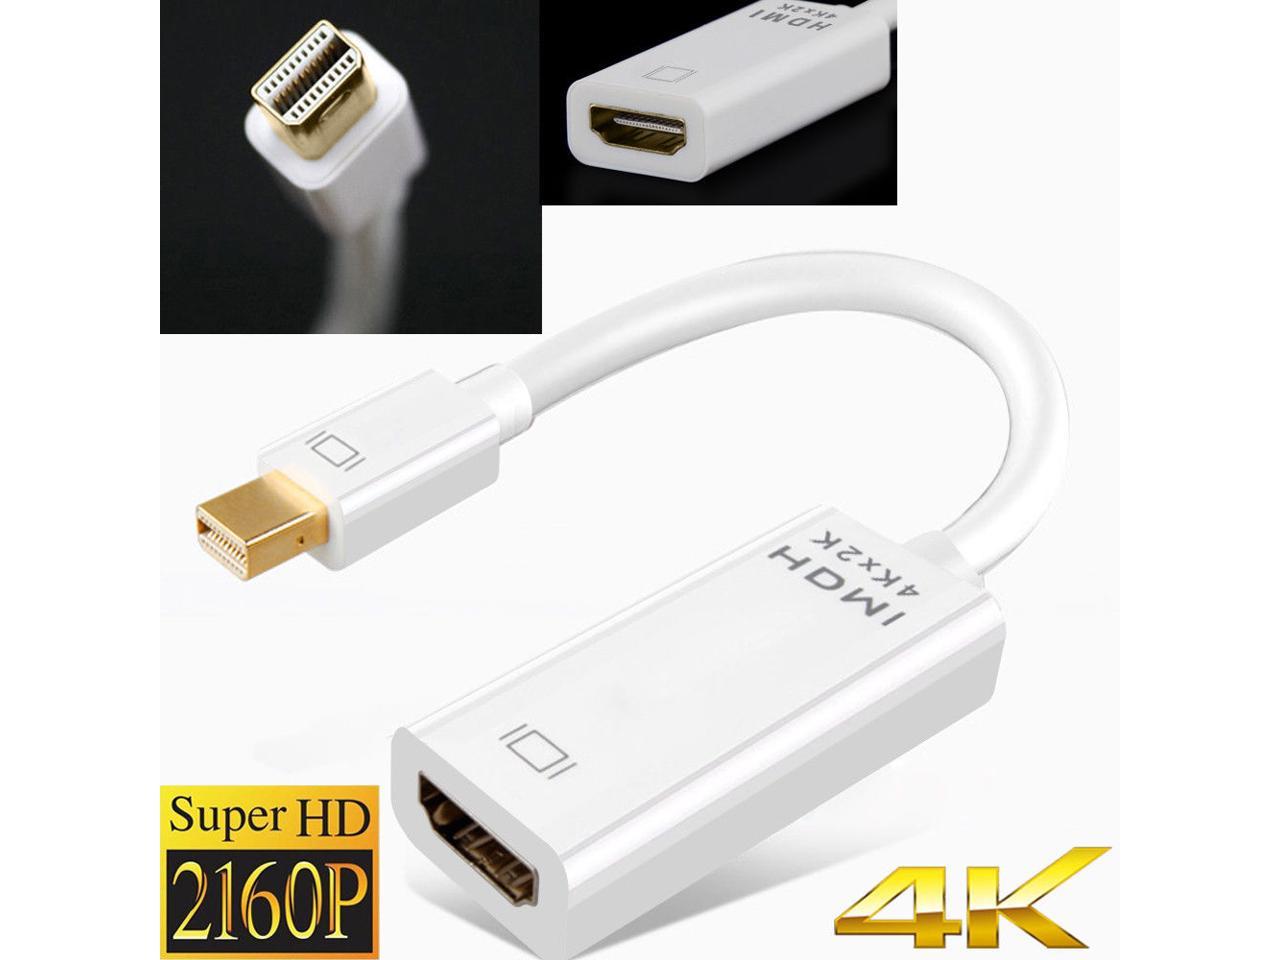 hdmi cable for macbook air to projector